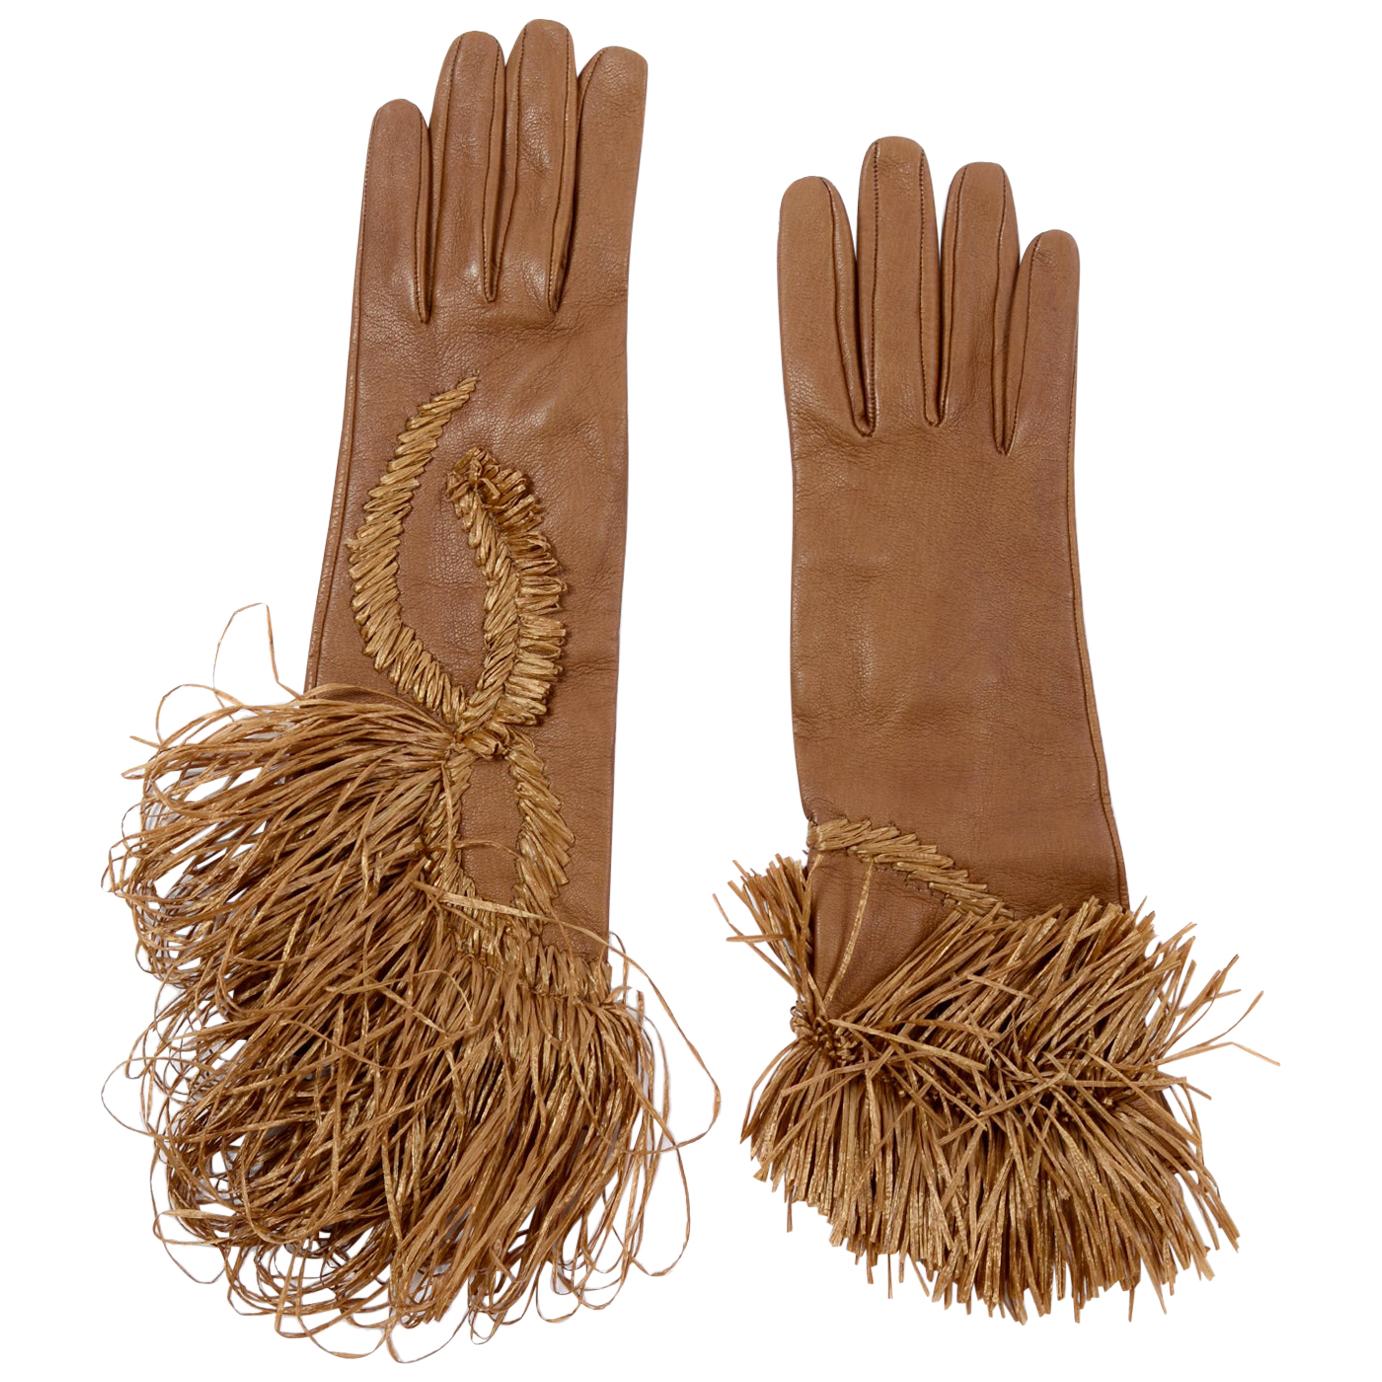 VINTAGE WEAR AMERICAN MADE GLOVES-NY State Fulton County BSA 